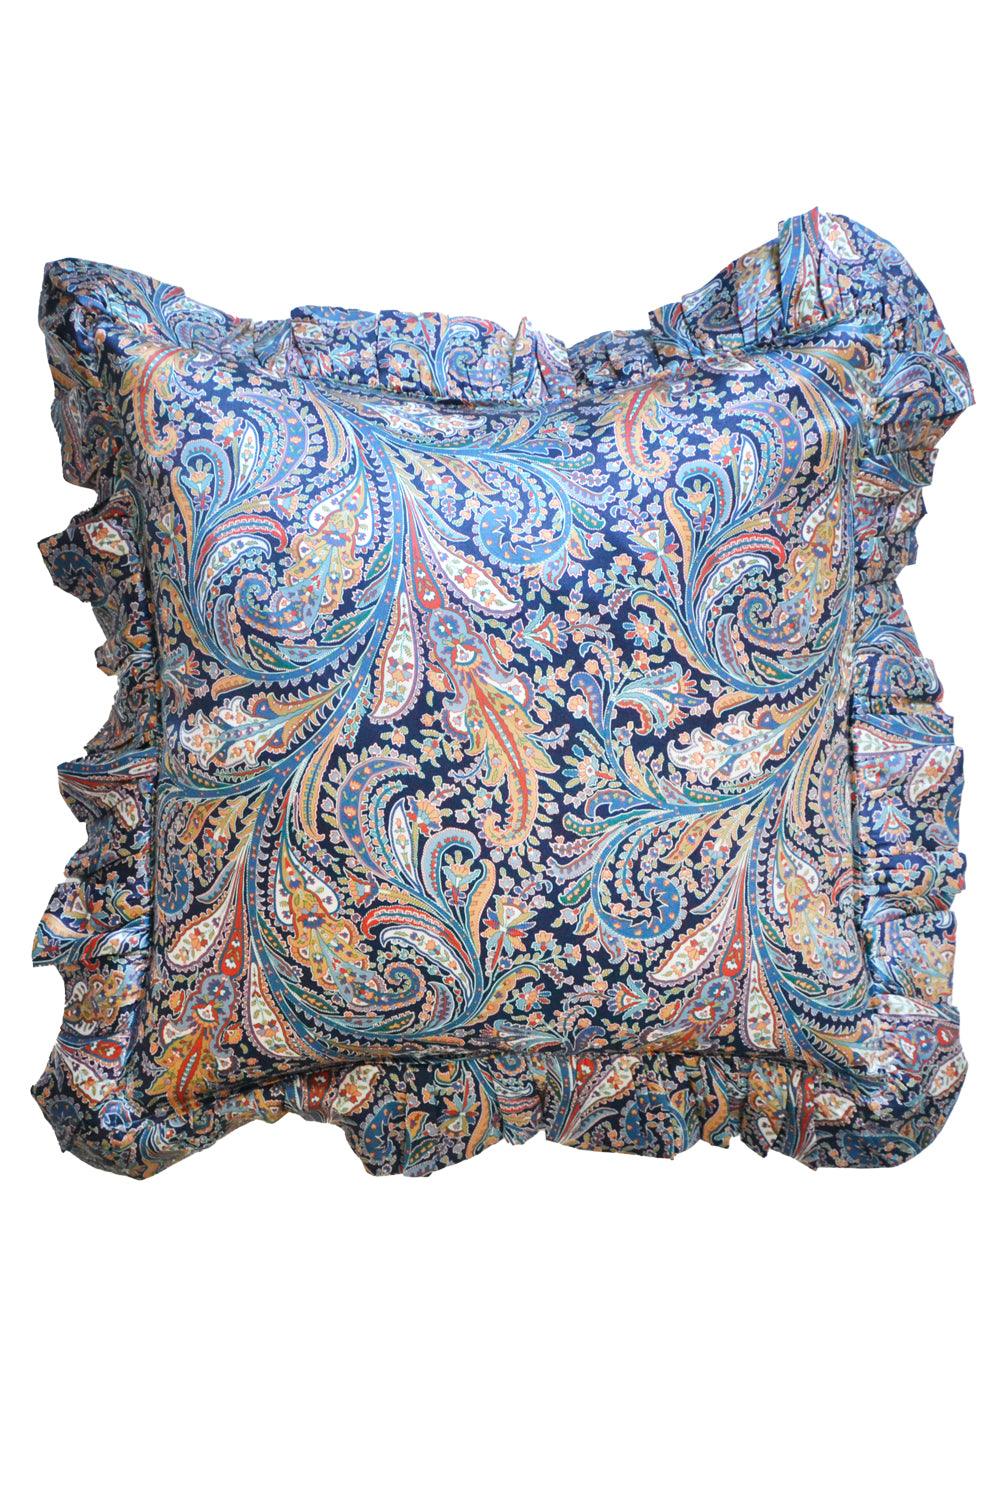 Silk Ruffle Cushion made with Liberty Fabric GREAT MISSENDEN - Coco & Wolf